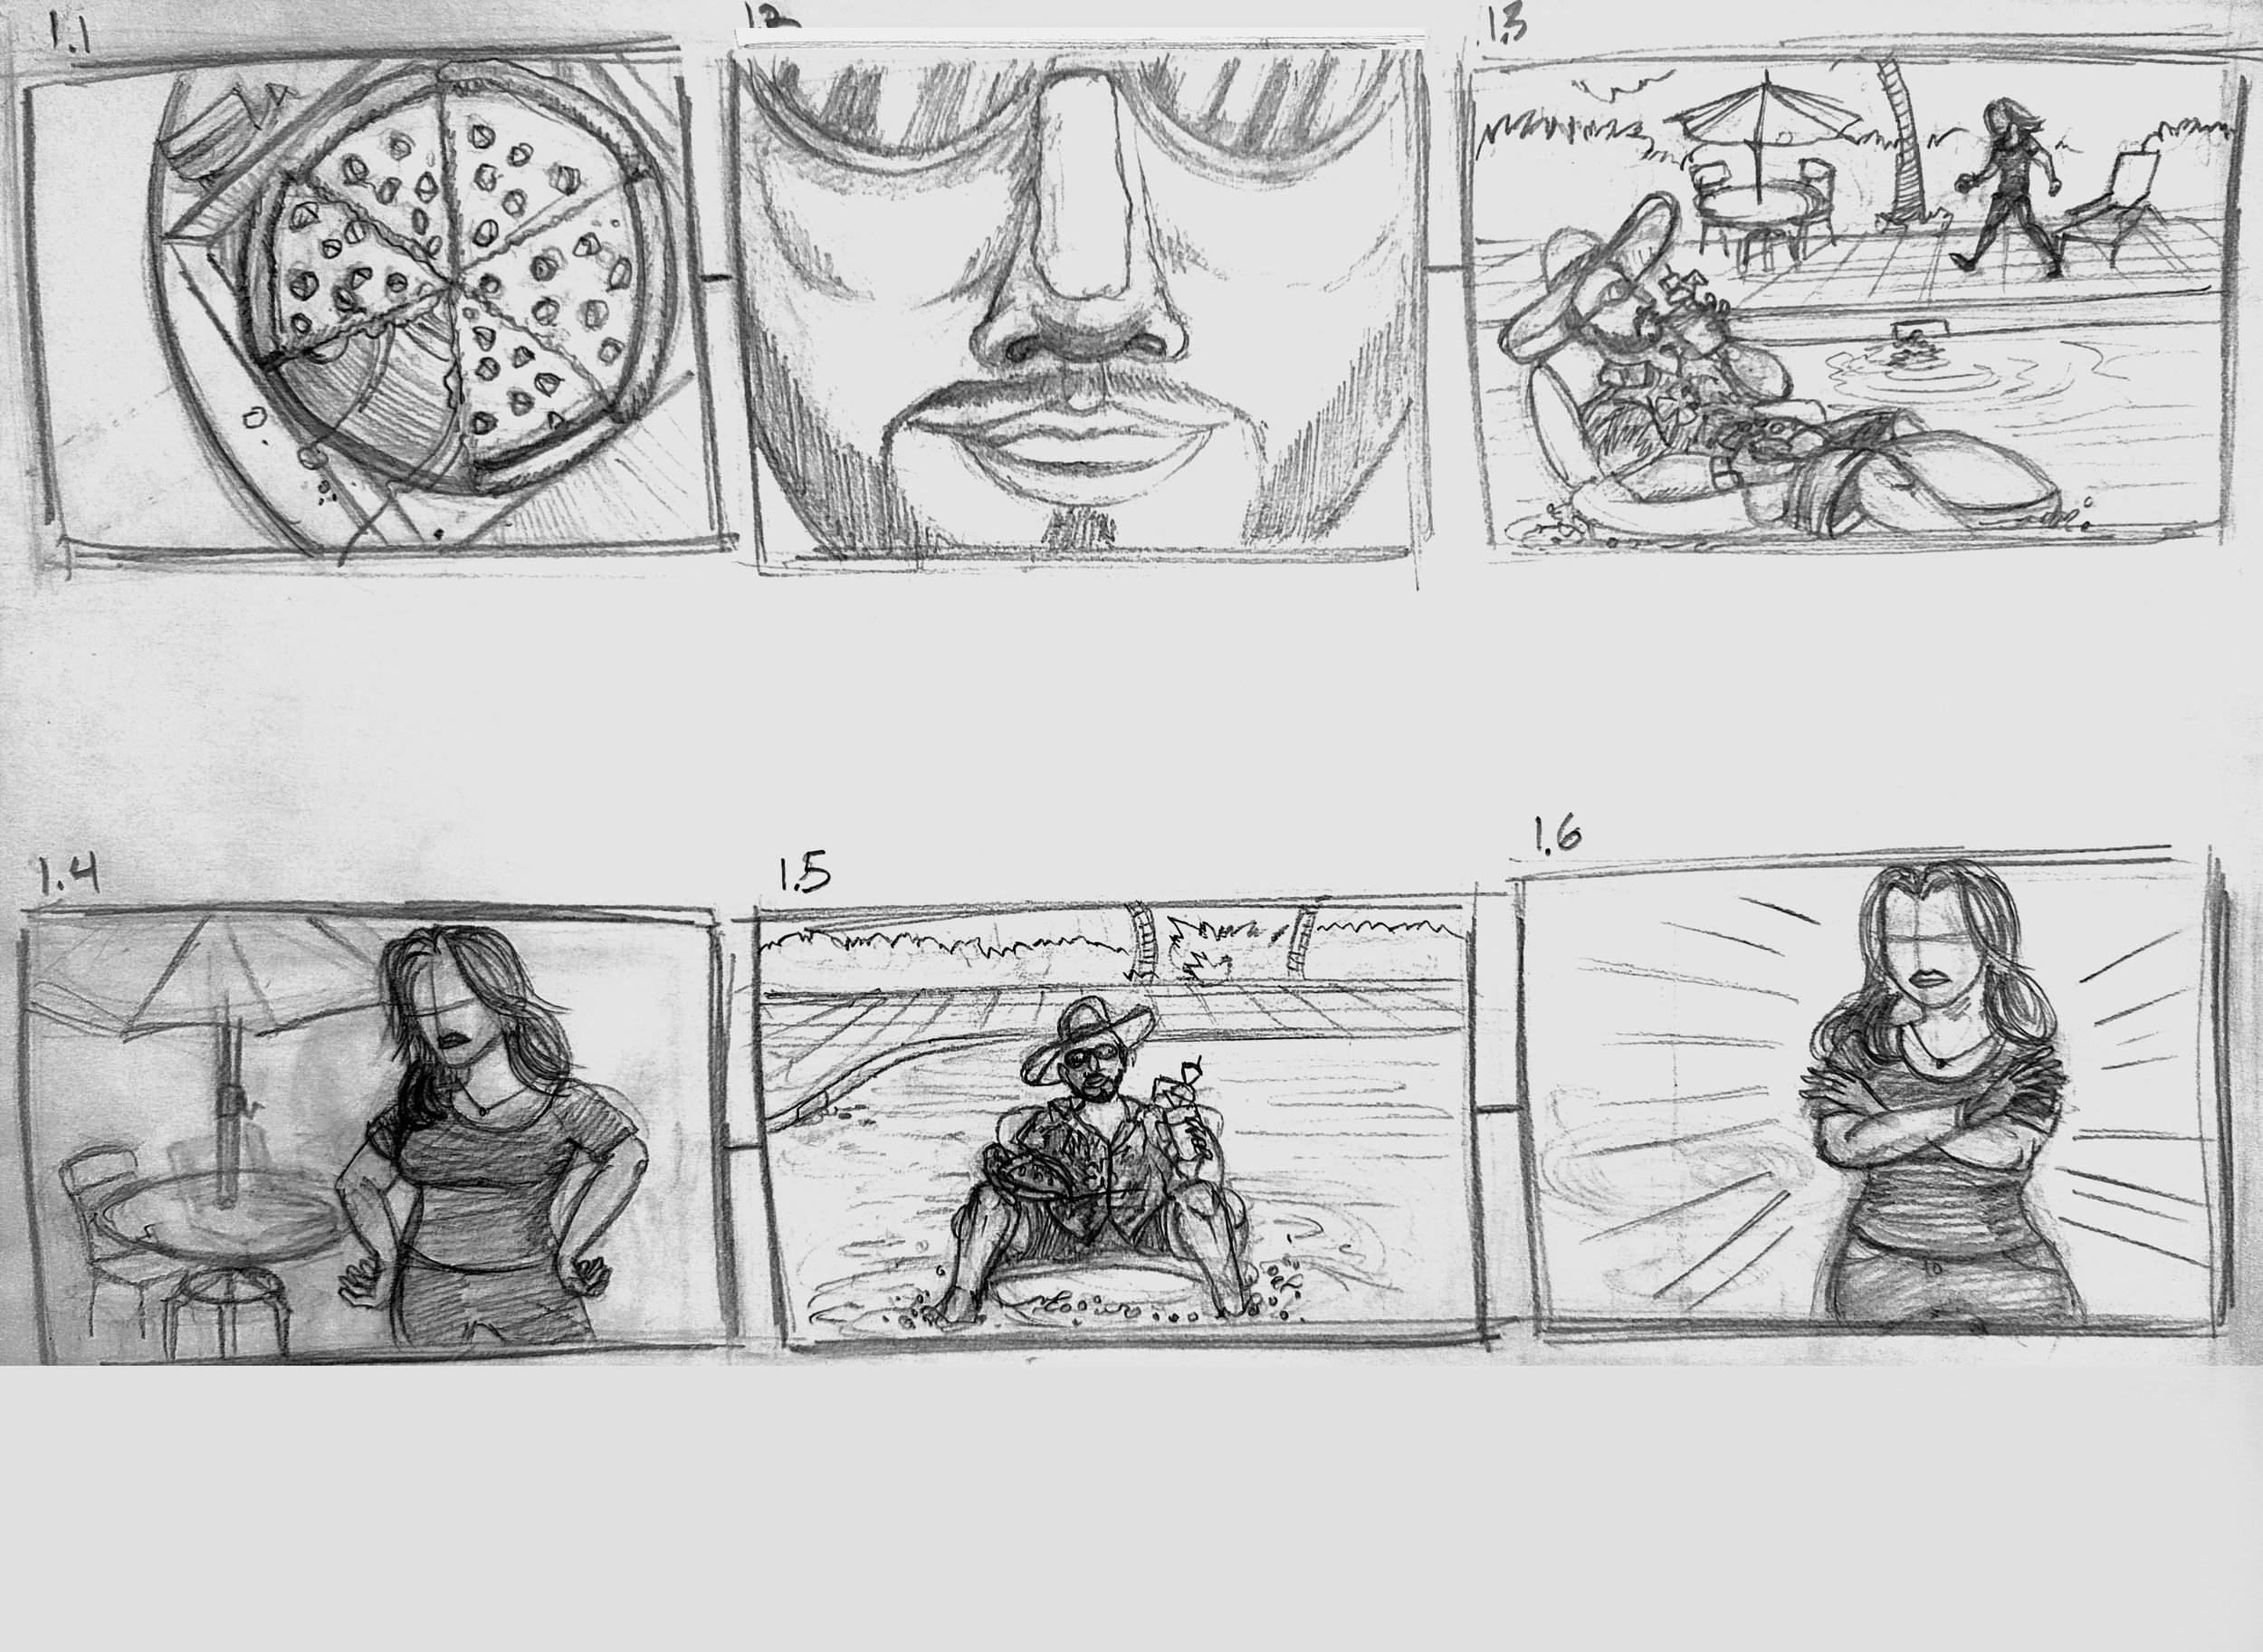 WR_Real_Suite_Eats_S1_E2_StoryBoard_Frames_1_0_to_1_6.jpg